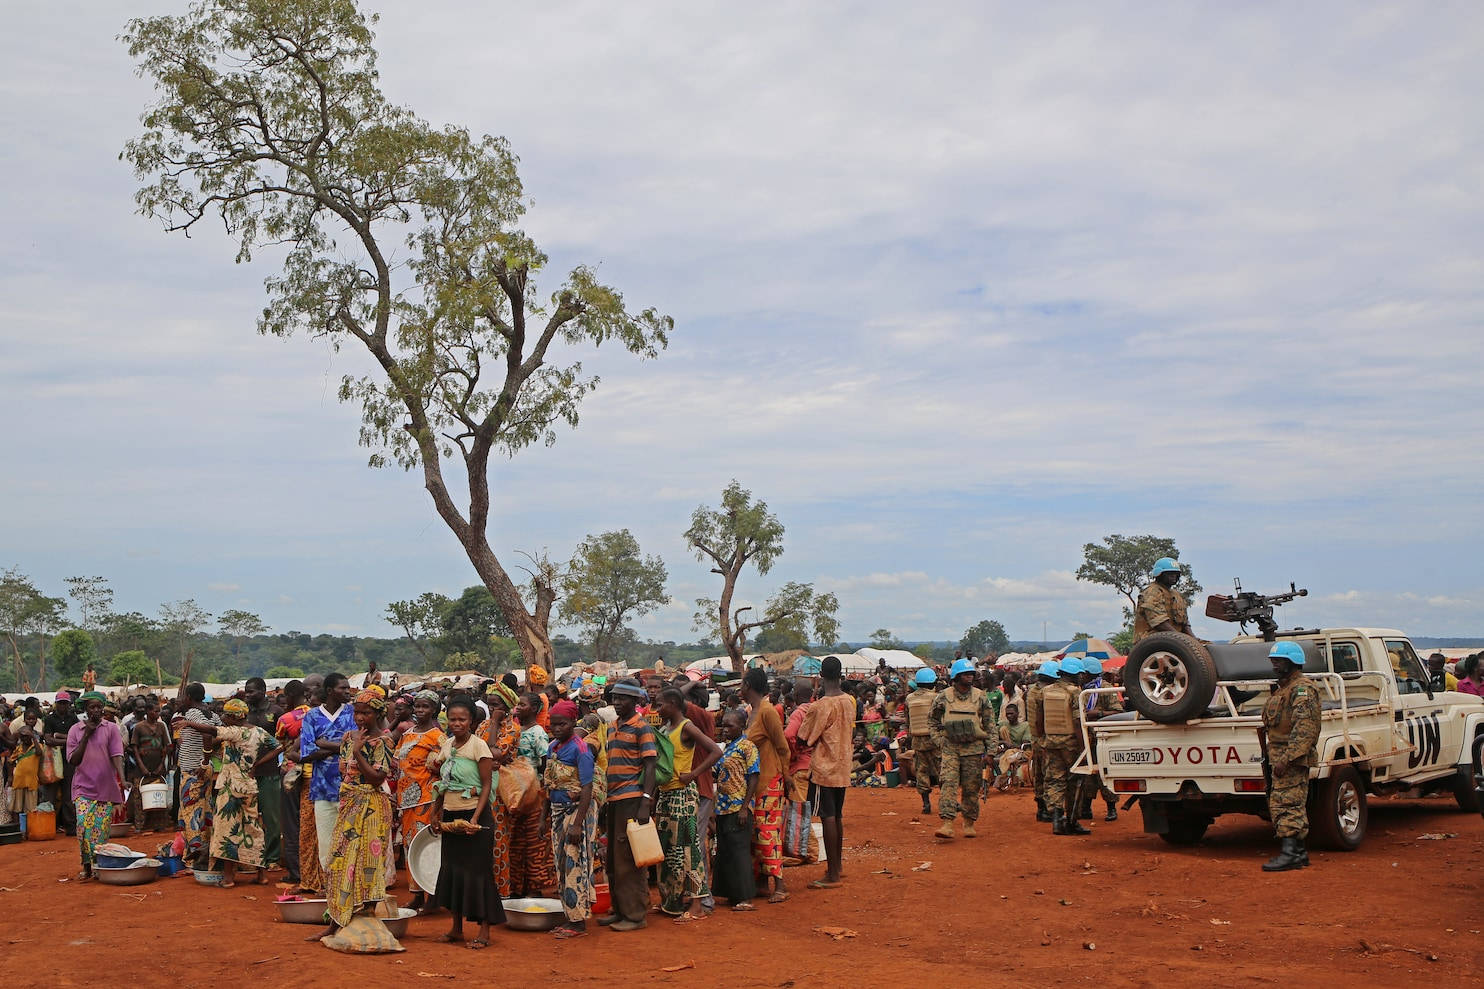 Crowd In Central African Republic Wallpaper